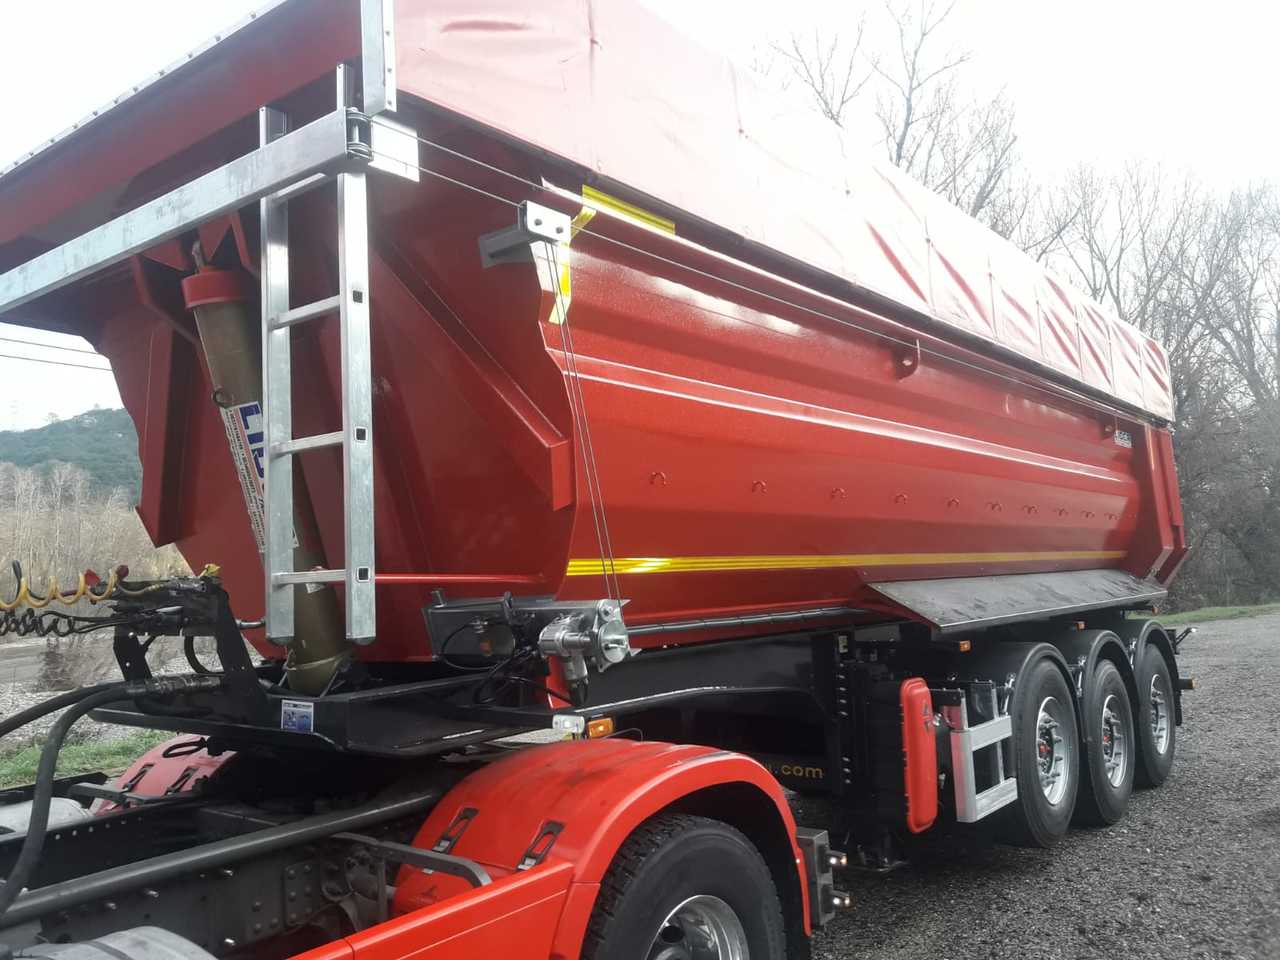 LIDER 2022 MODELS YEAR NEW (MANUFACTURER COMPANY LIDER TRAILER & TANKER leasing LIDER 2022 MODELS YEAR NEW (MANUFACTURER COMPANY LIDER TRAILER & TANKER: obrázek 3